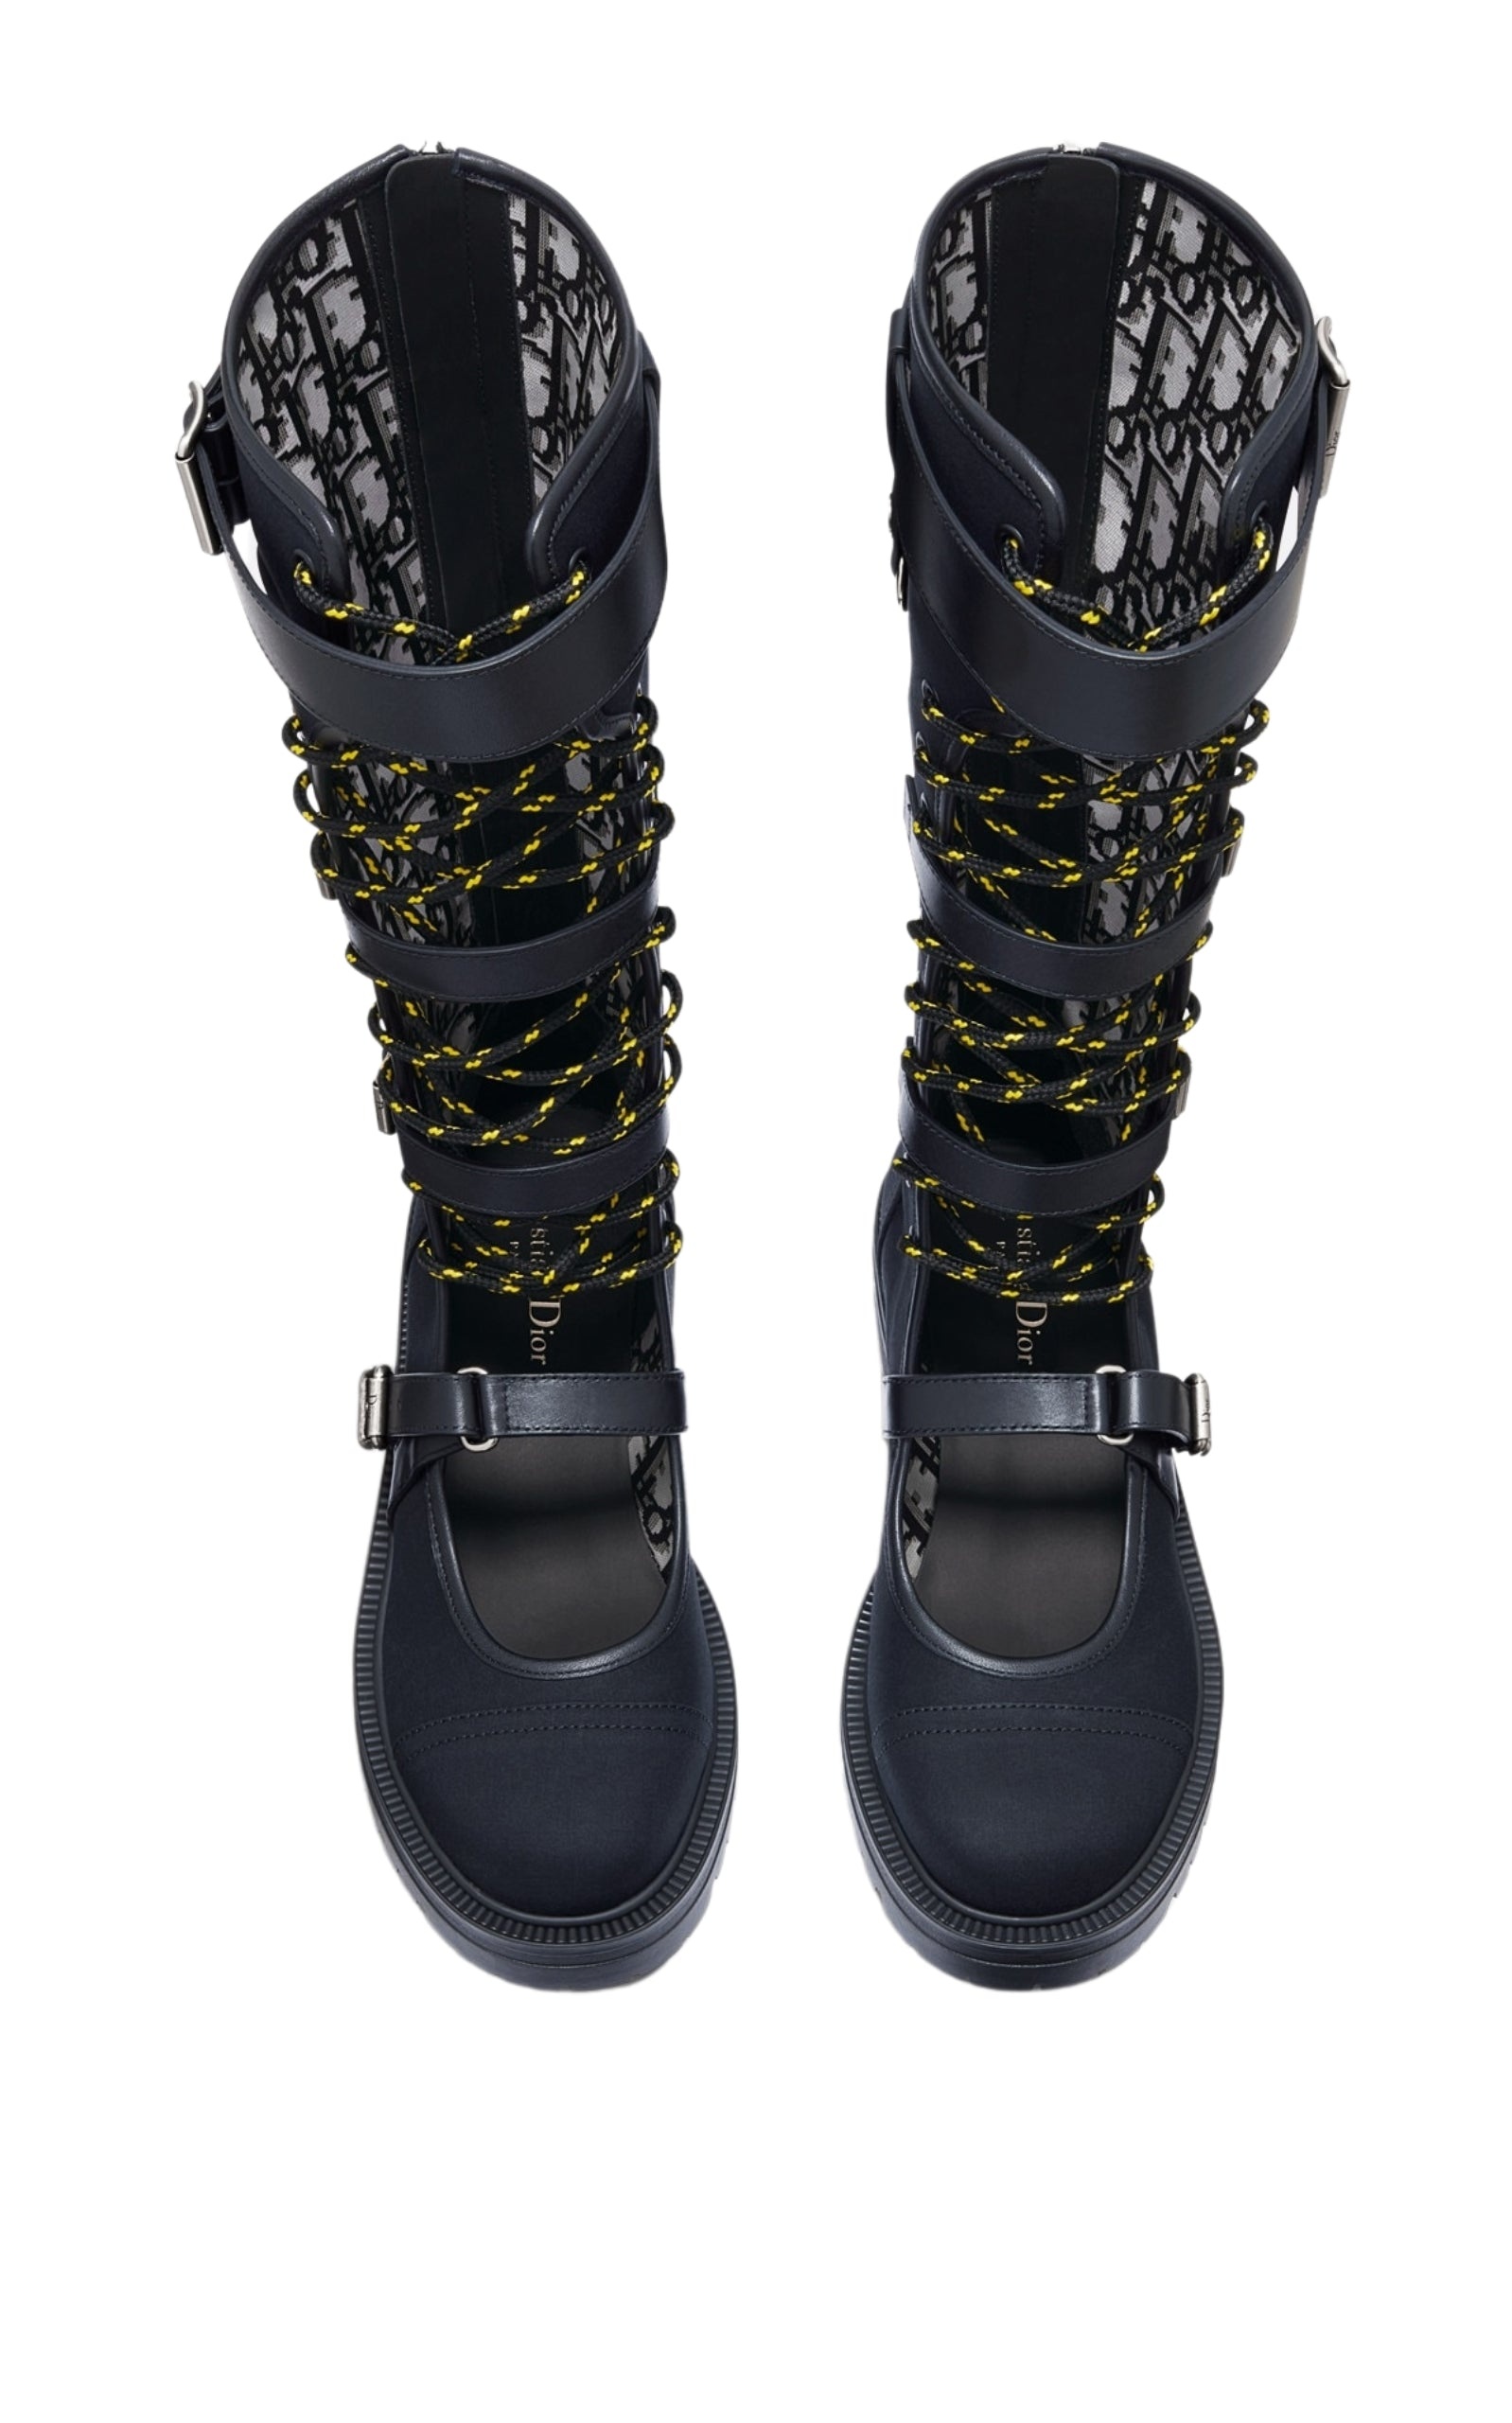 Dioranger Boots in Black Technical Fabric - 6